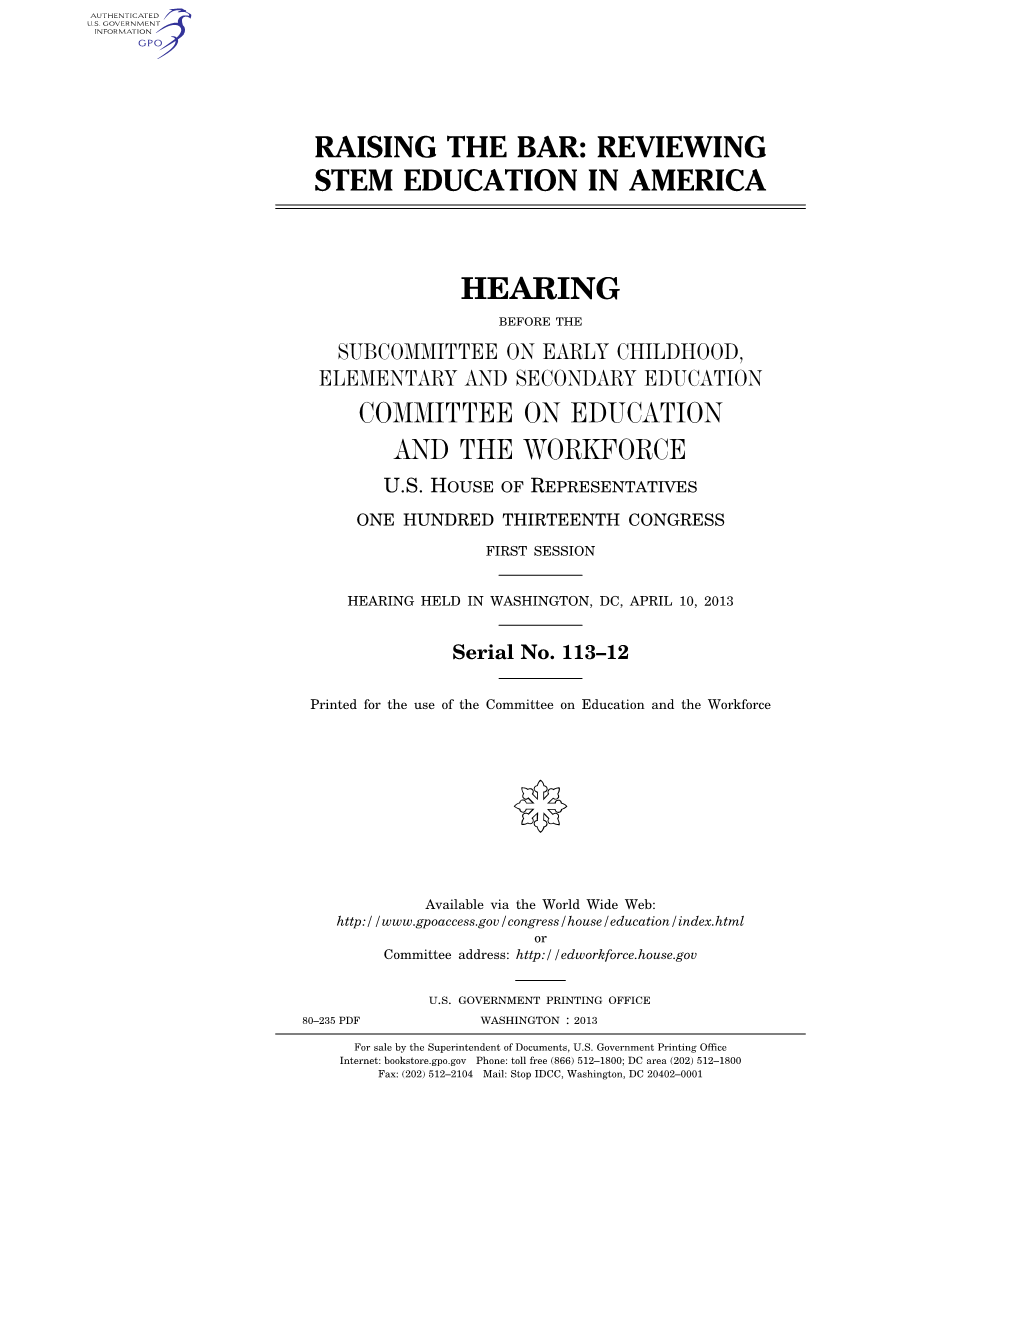 Reviewing STEM Education in America : Hearing